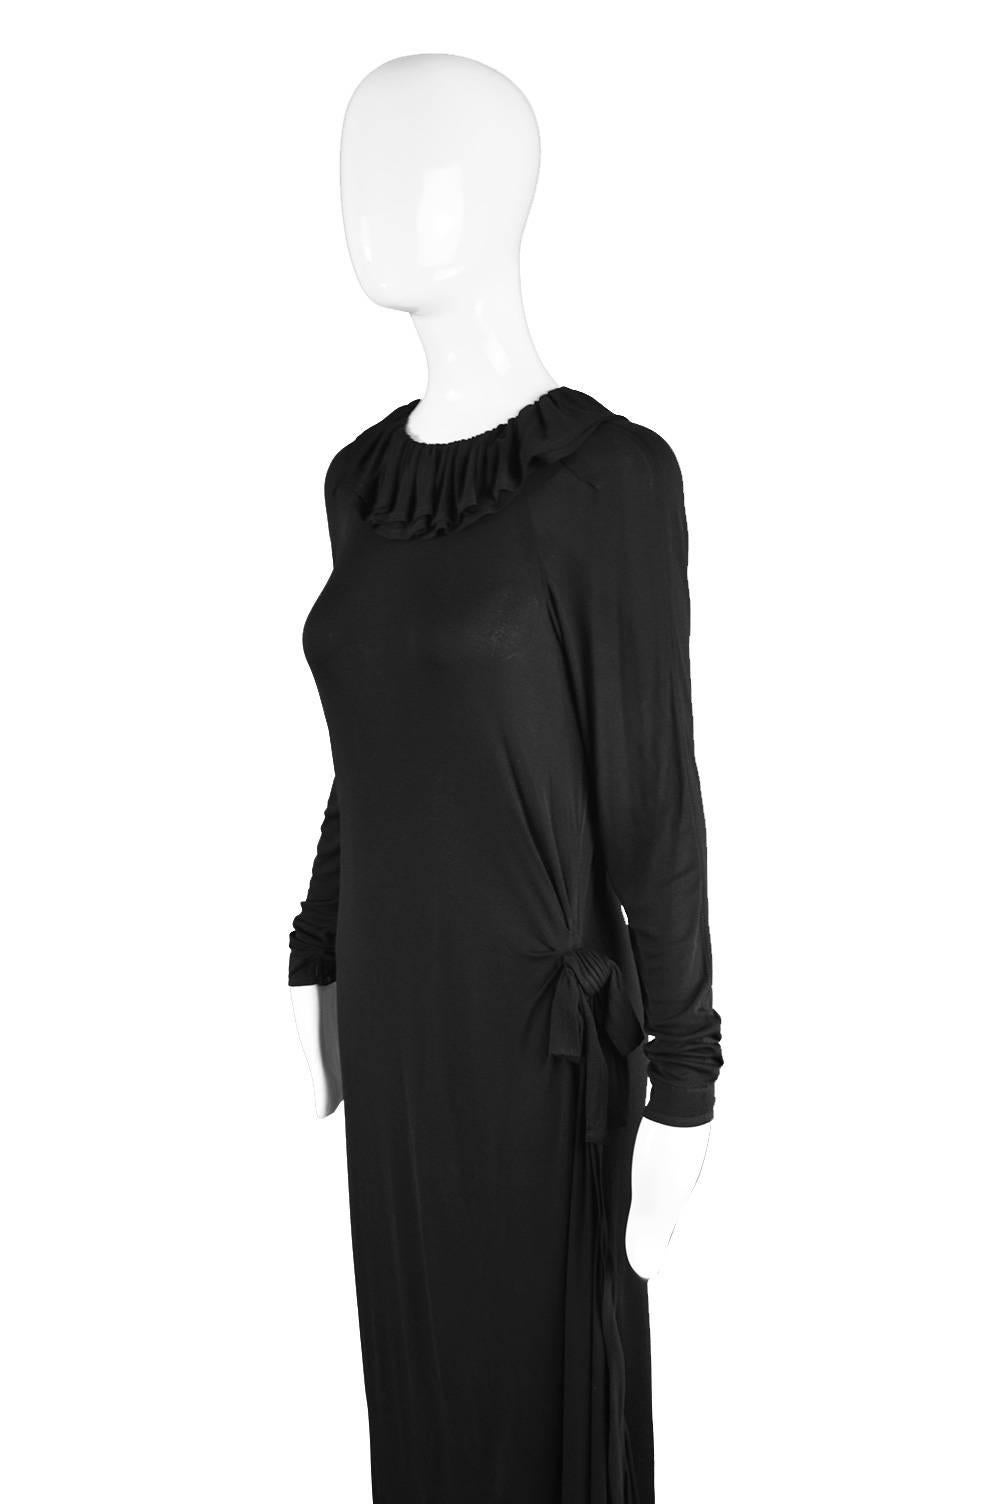 Women's Jean Muir Black Draped Rayon Jersey Vintage Dress with Side Train, 1970s For Sale